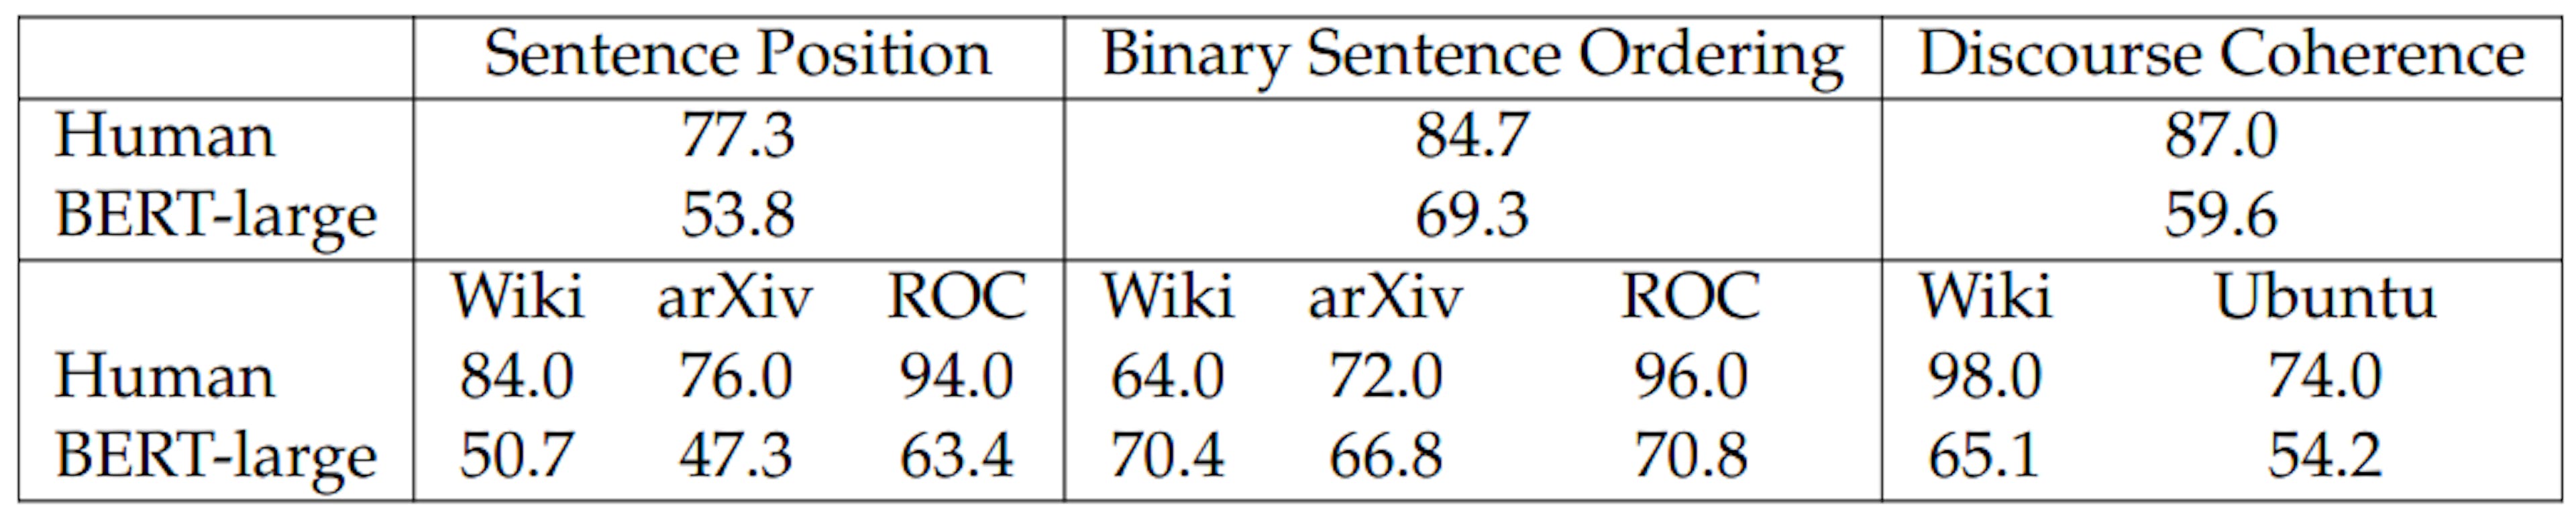 Table 4.7: Accuracies (%) for a human annotator and BERT-large on Sentence Position, Binary Sentence Ordering, and Discourse Coherence tasks.